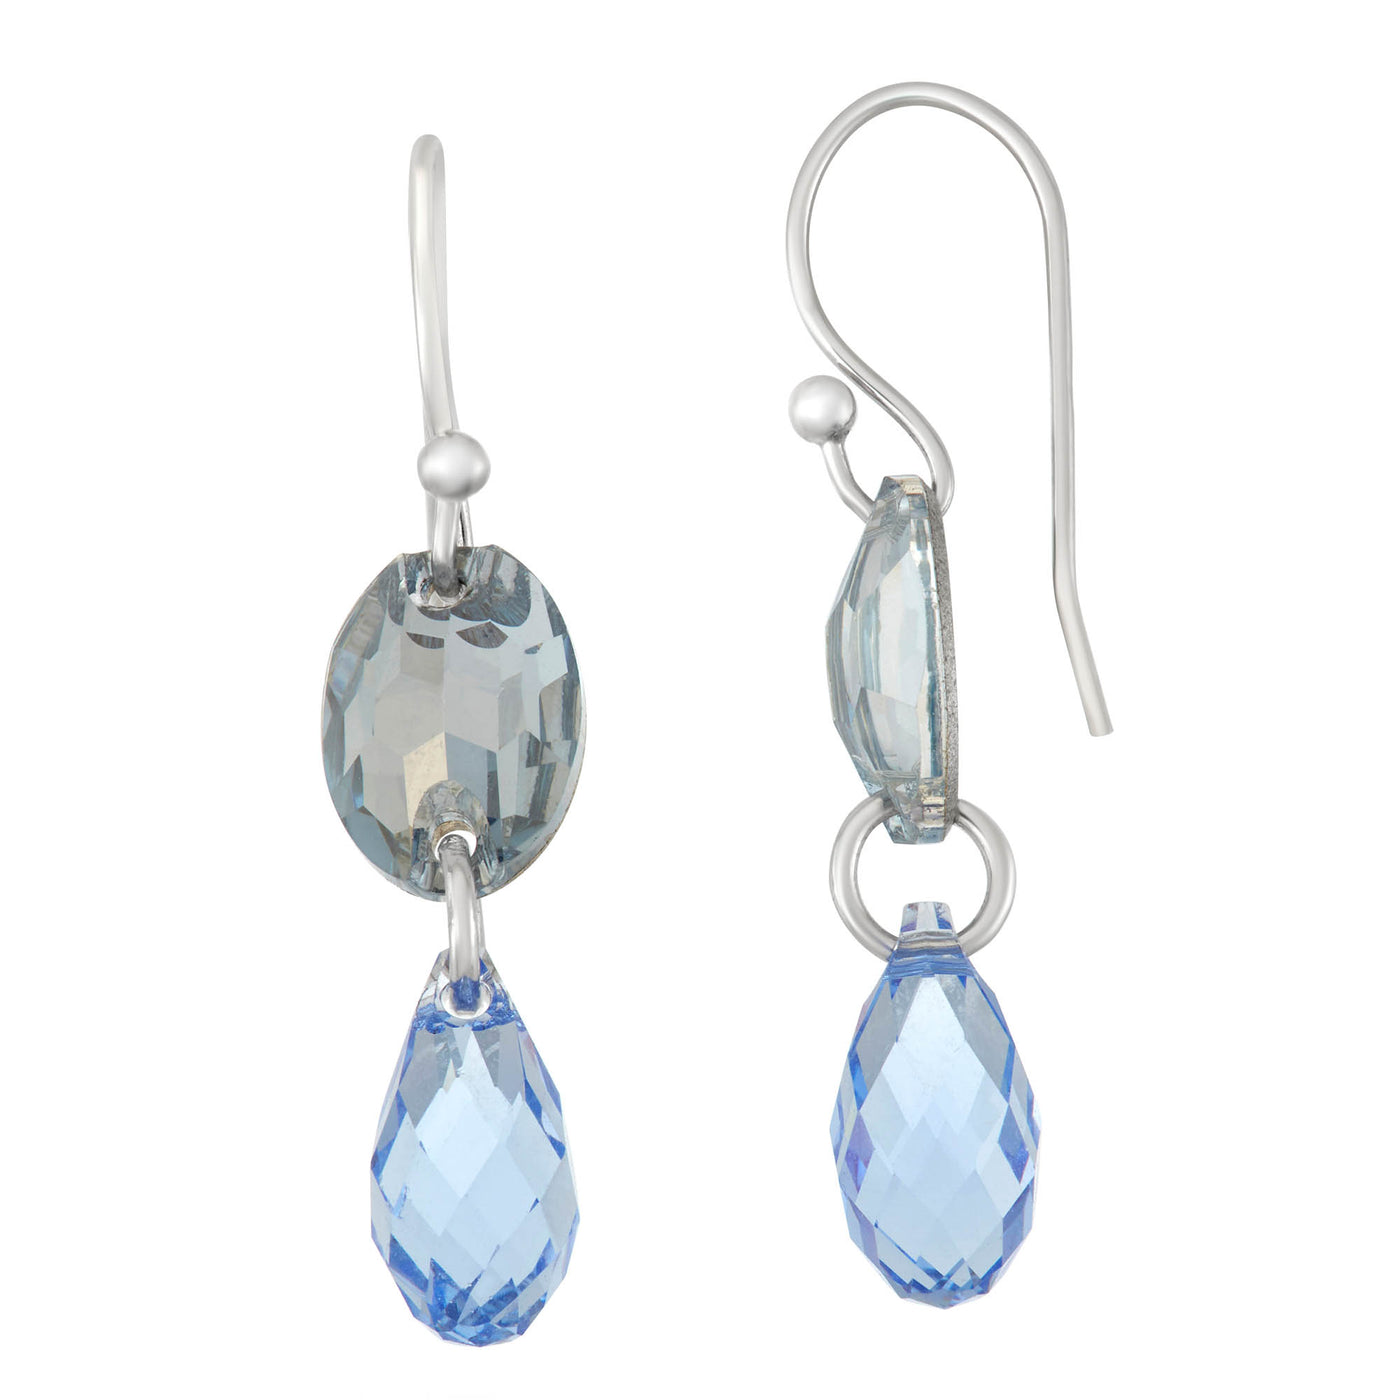 Rebecca Sloane Silver Oval Tear Drop Earring With Blue Crystals